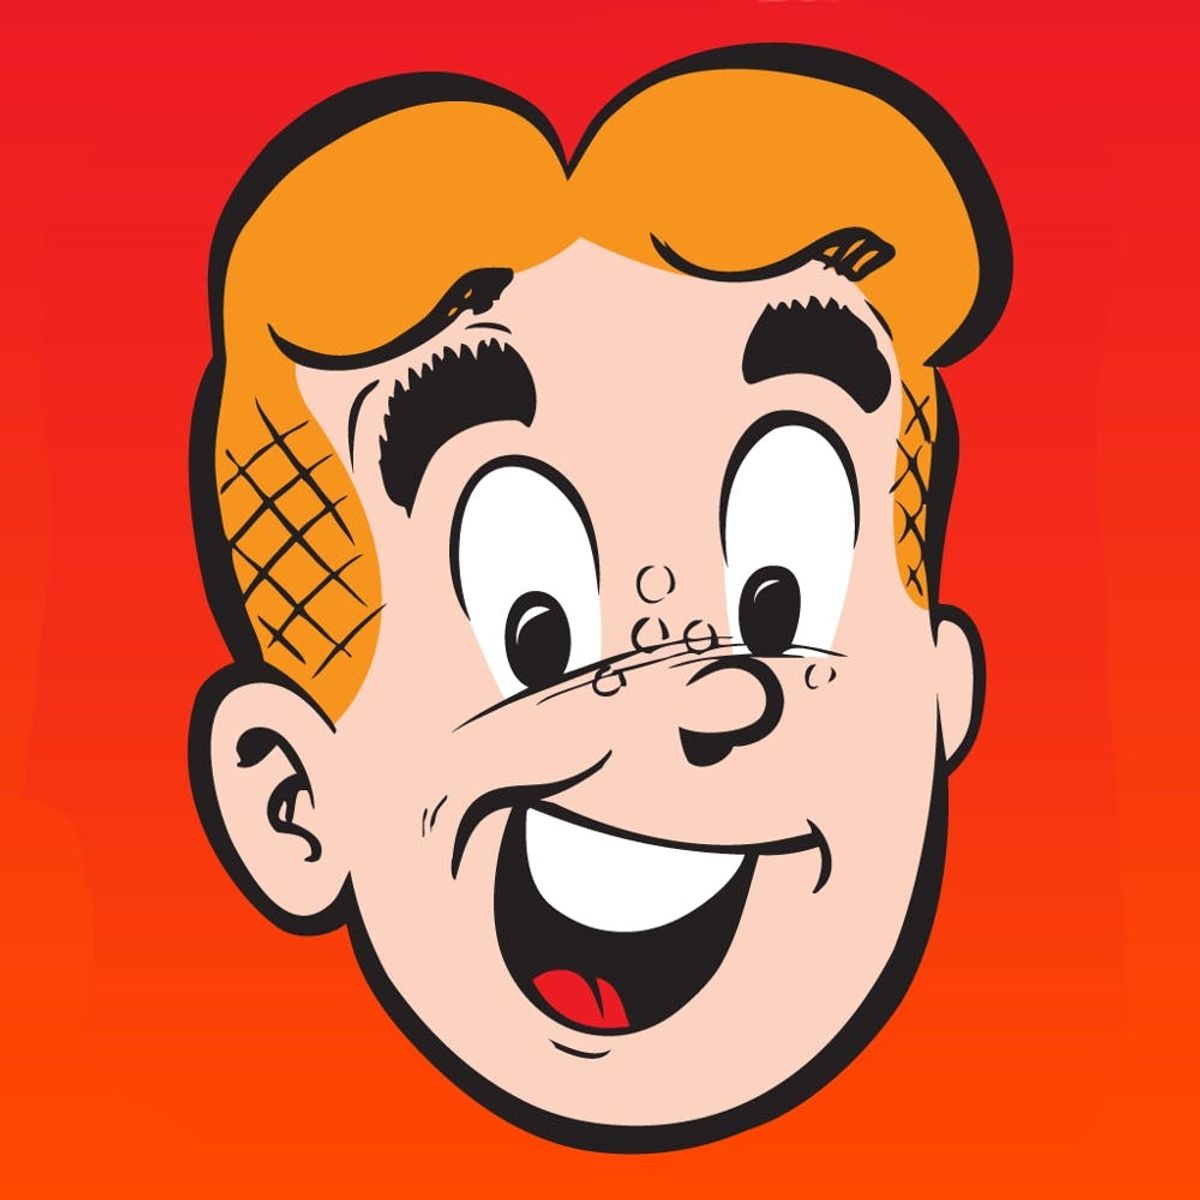 The CW’s New Archie Comics Adaptation Is NOT at All What You’re Expecting